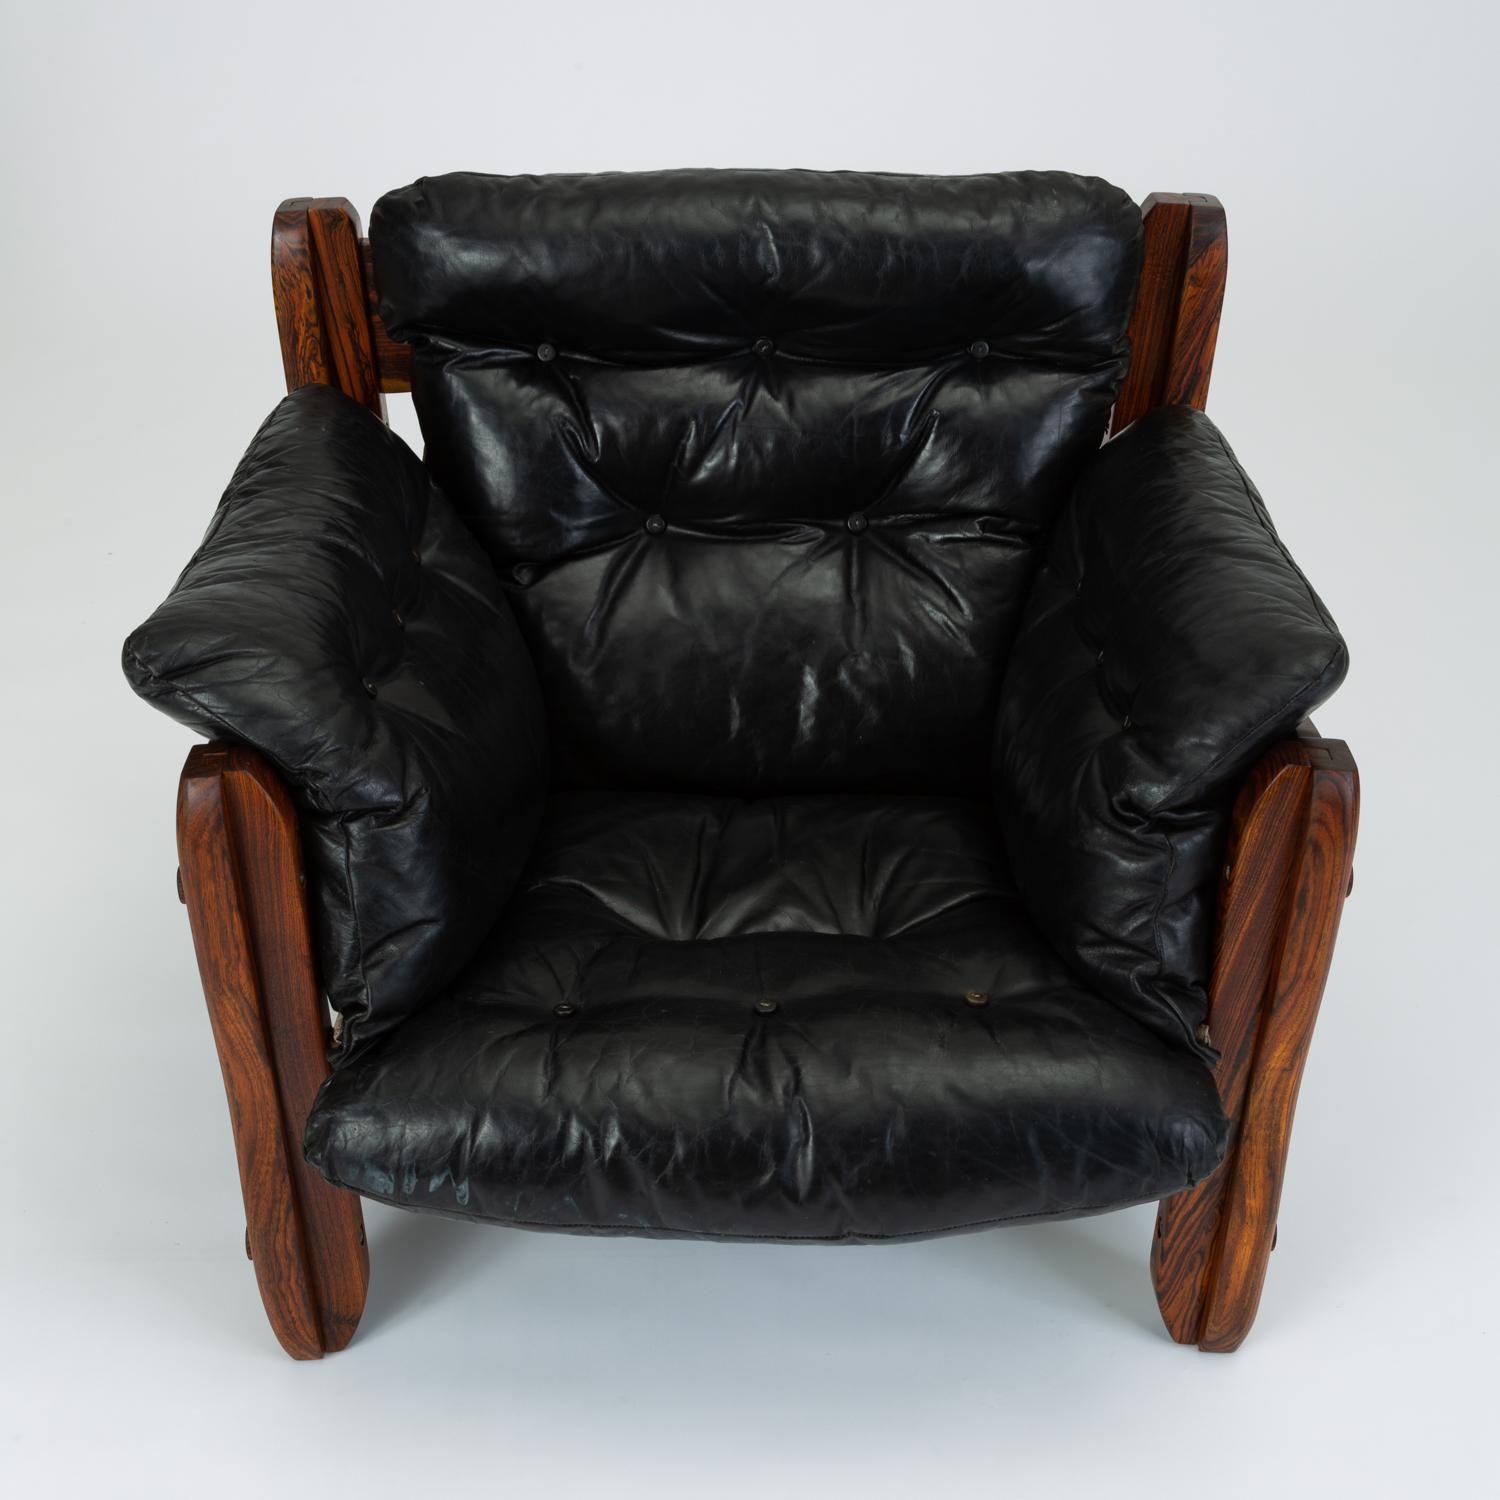 A deep, wide lounge chair from Don Shoemaker’s “Descanso” line produced in highly figured cueramo wood and black leather. The blocky construction and broad planes of the frame showcase the almost marbled appearance of the woodgrain, while the wavy